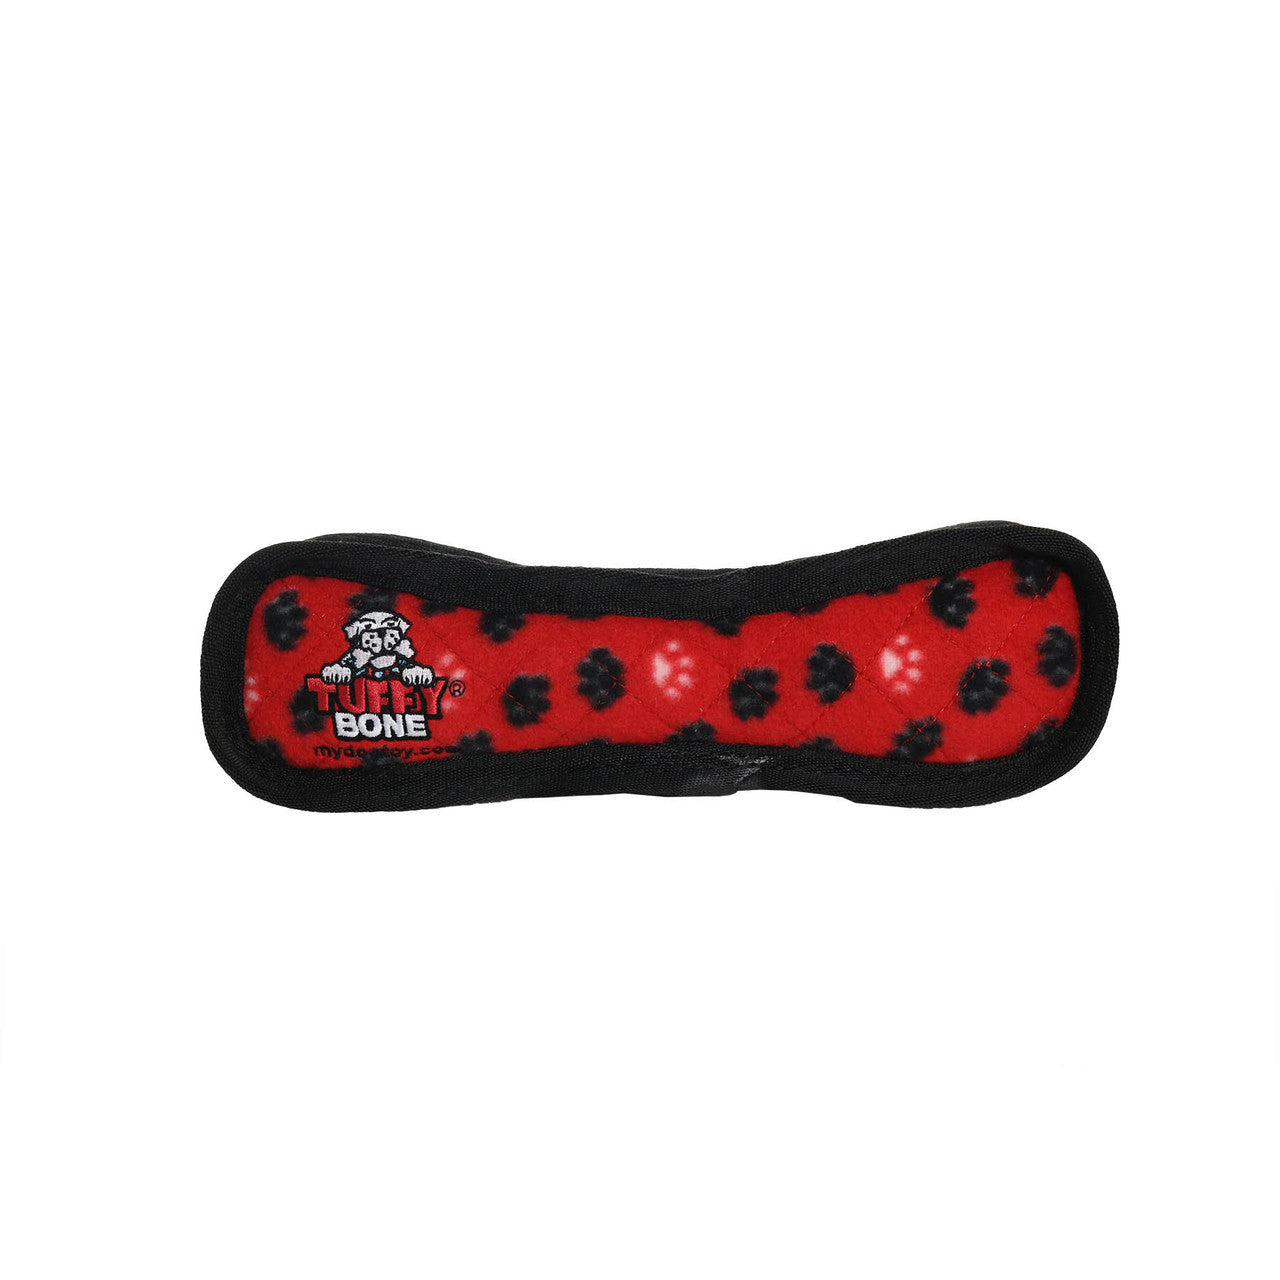 Tuffy Ultimate Bone Durable Dog Toy Red Paw 13in